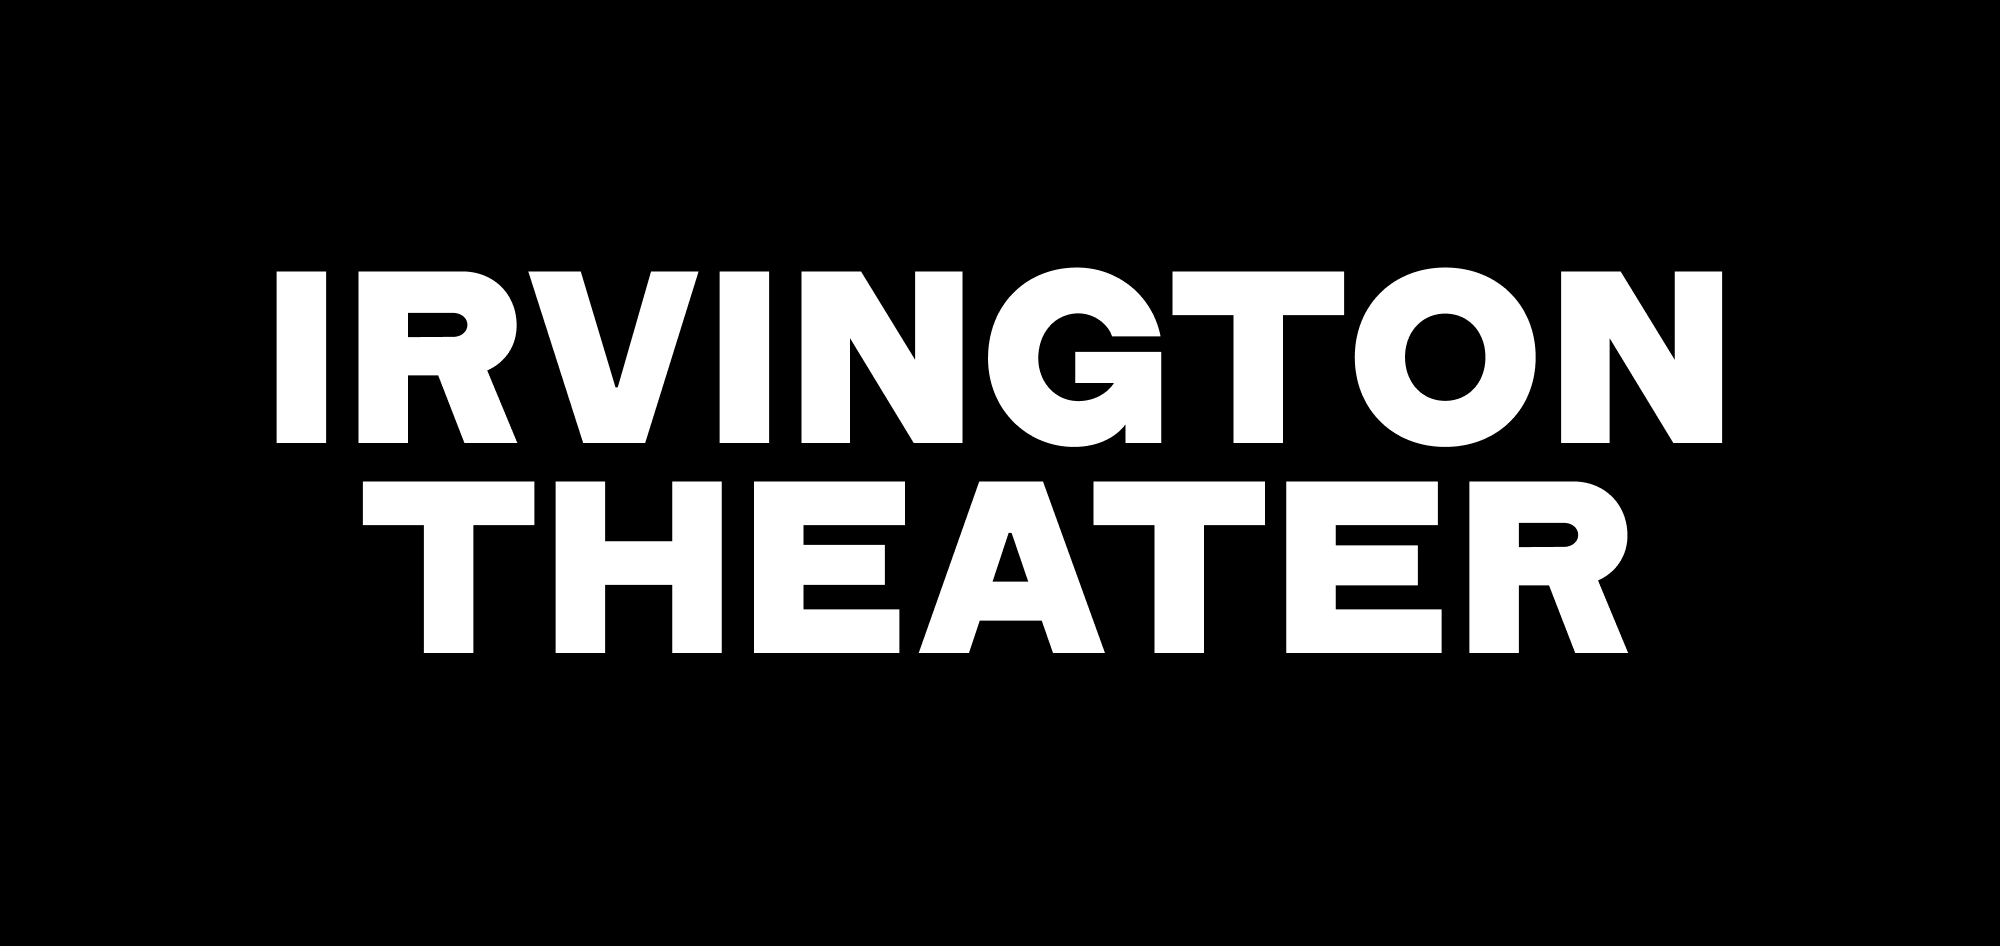 New Logo and Identity for Irvington Theater by A.A. Trabucco-Campos and Pràctica